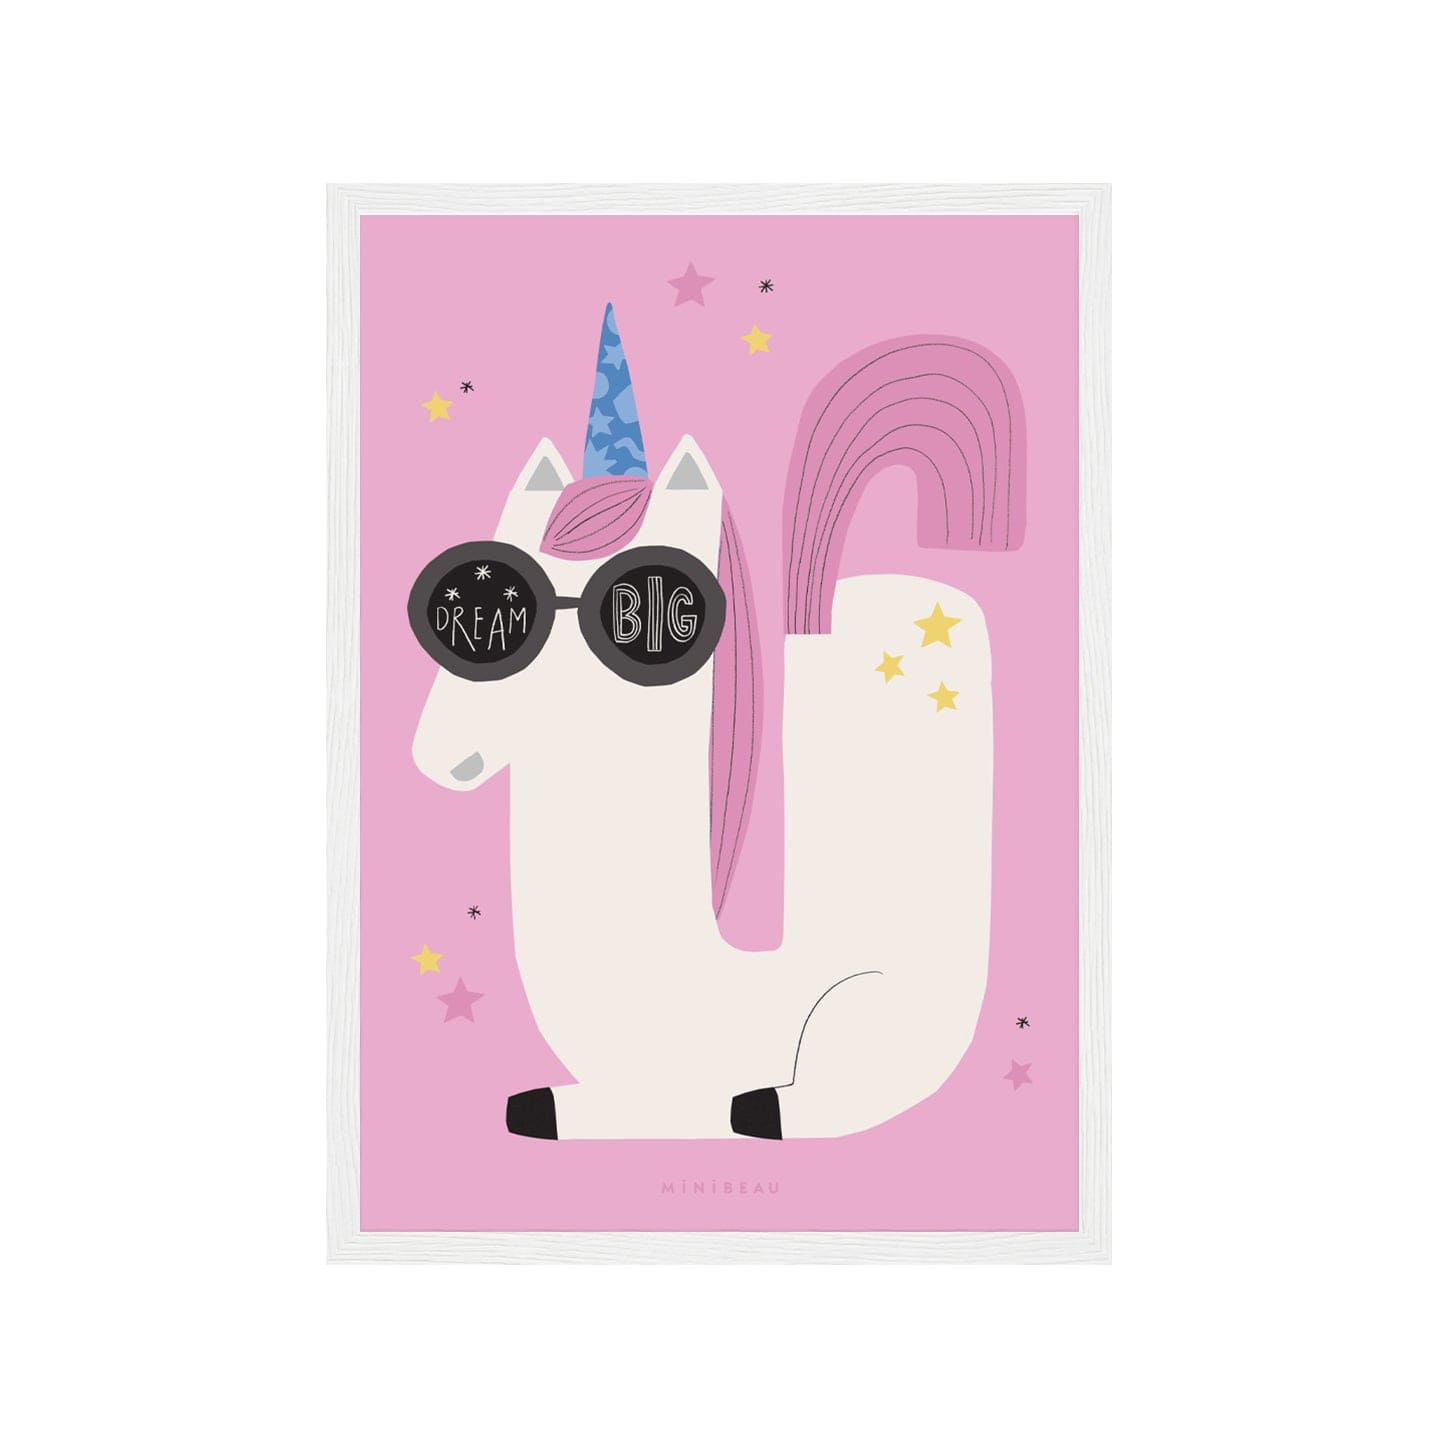 Art print in a white frame. Our Happy Alphabet 'U' Art Print shows a cool, sunglasses-wearing white unicorn, laying in the shape of a U with a pink tail and blue horn with yellow stars on its back. The words DREAM BIG are in the lenses of the sunglasses. All on a pink background.